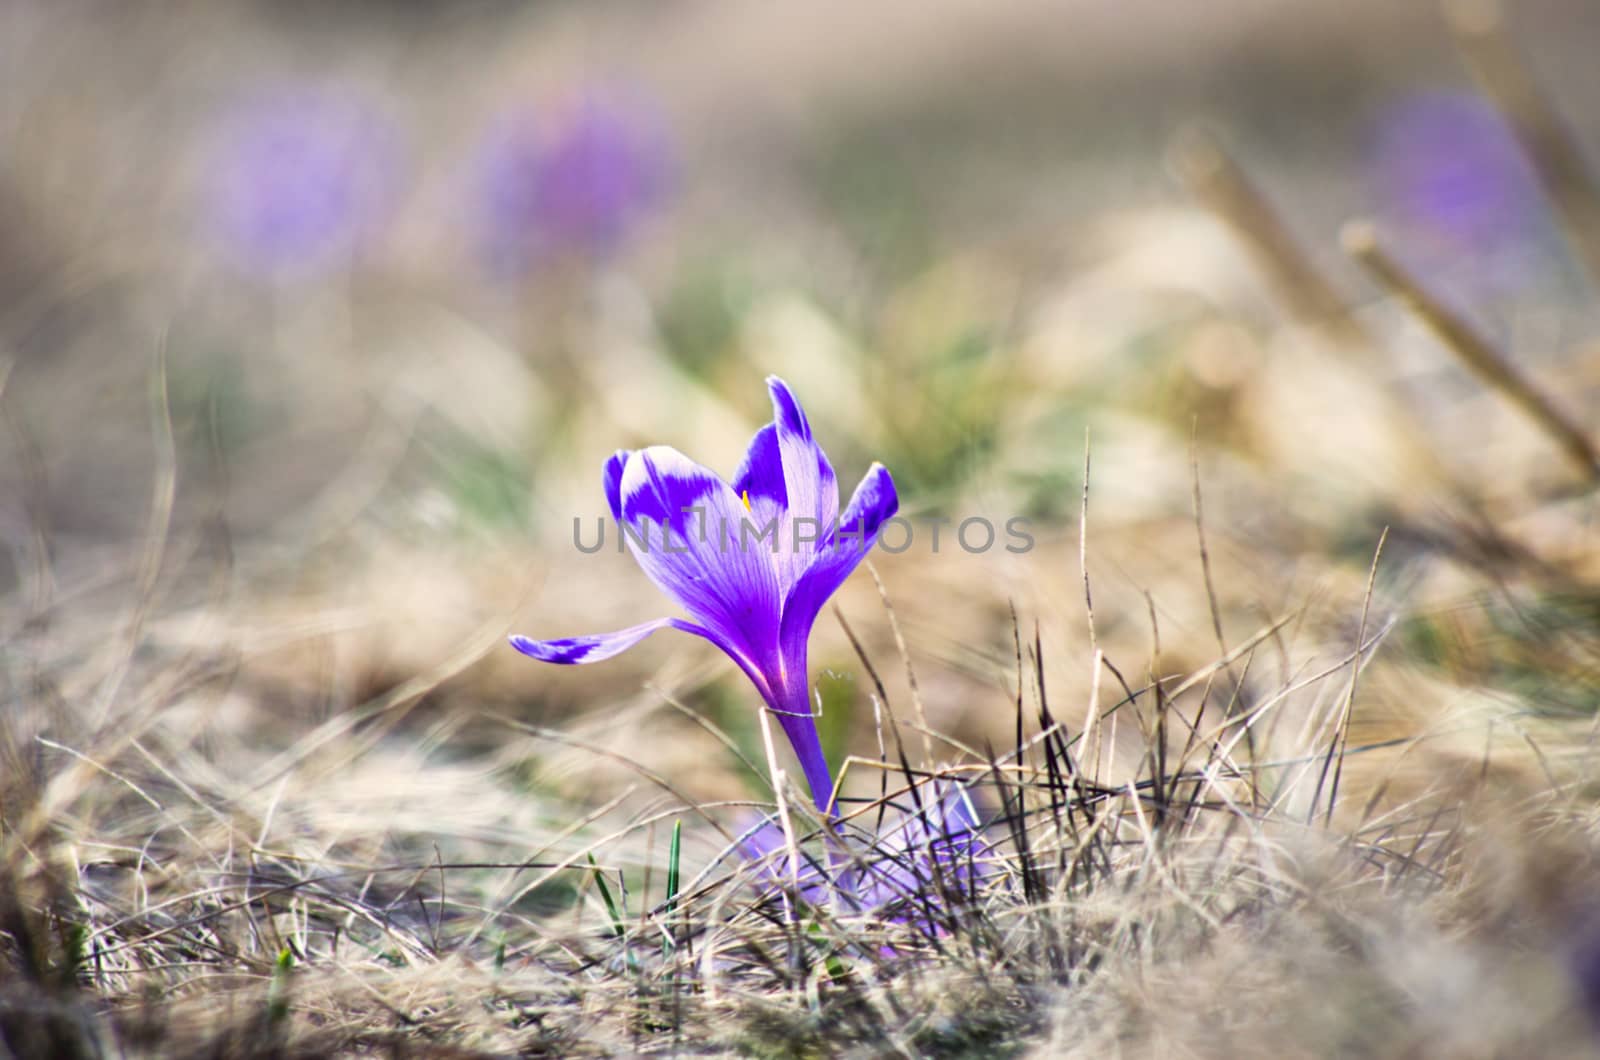 Spring crocus flowers on green natural background. Selective focus